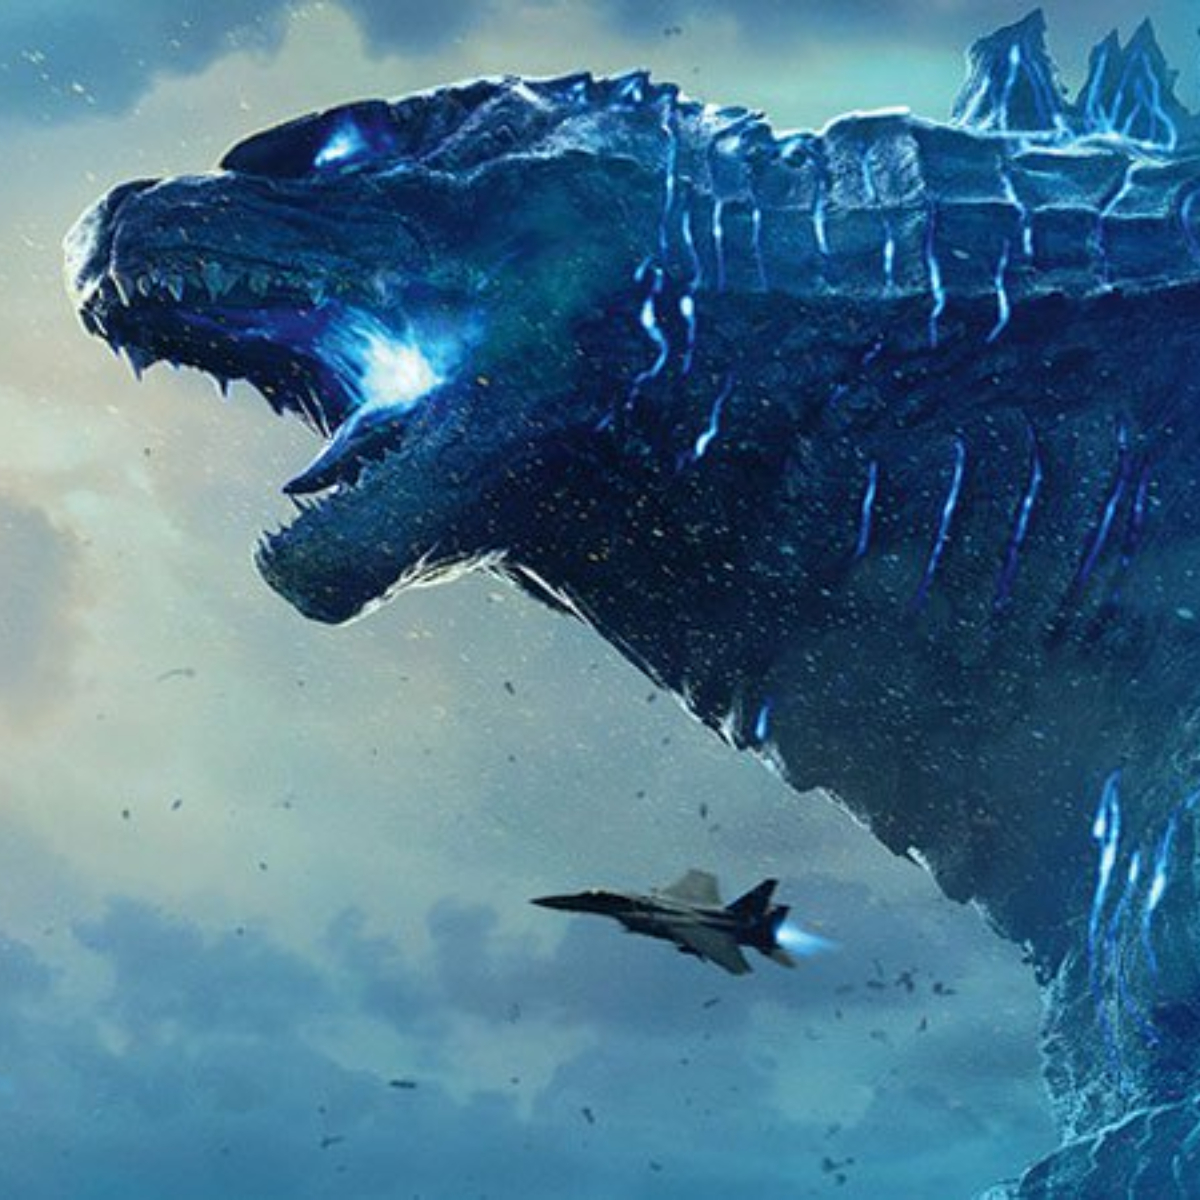 Godzilla: King of the Monsters Box Office Collection Day 2 India: Millie Bobby Brown starrer shows improvement